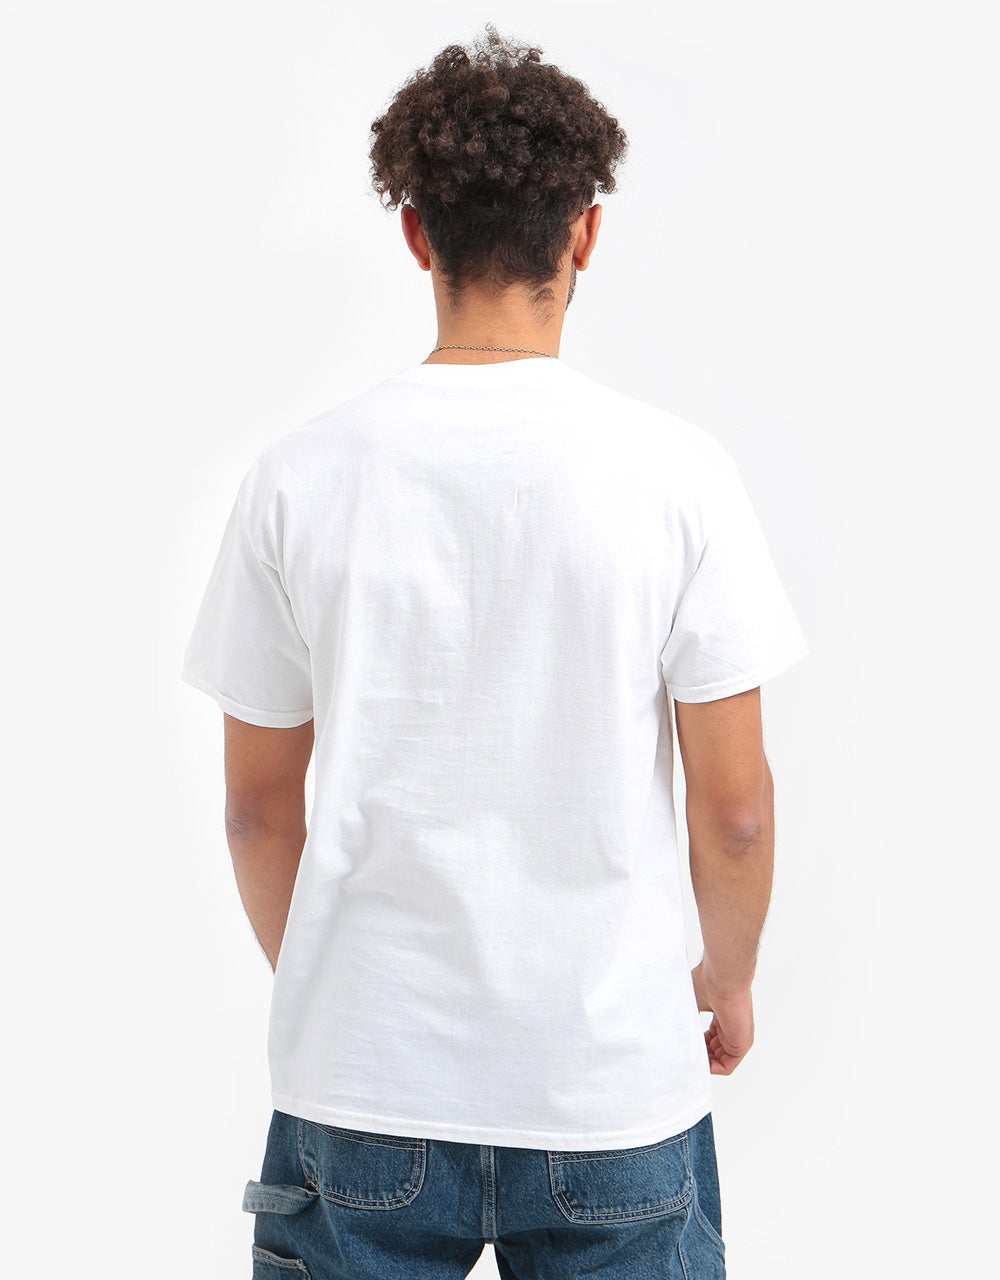 Route One Connecting People T-Shirt - White